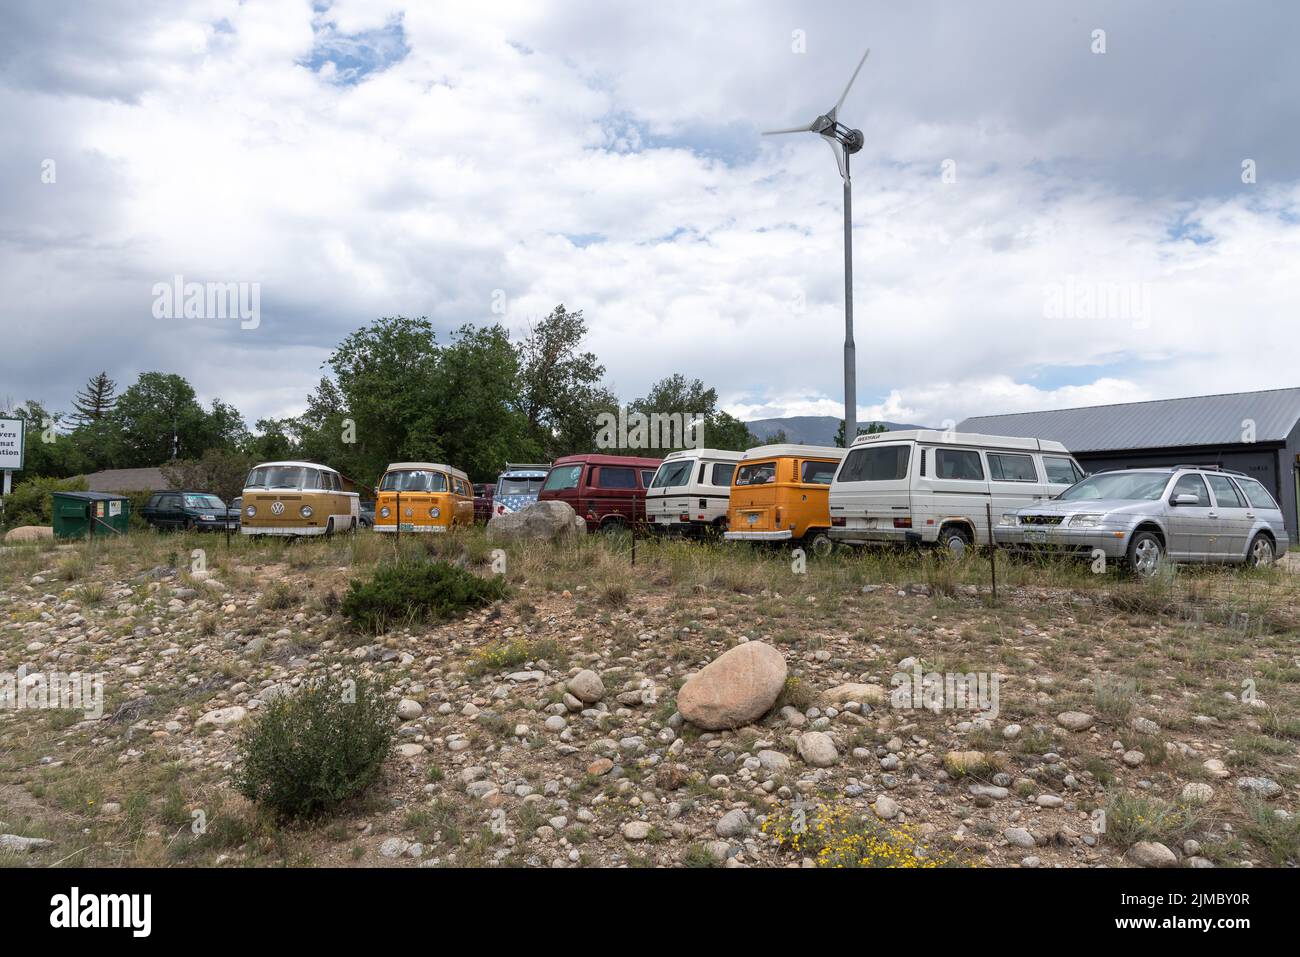 A line of Volkswagen vans parked in a row outside of Uranus, an auto repair shop on Highway 24, Buena Vista, Colorado. Stock Photo